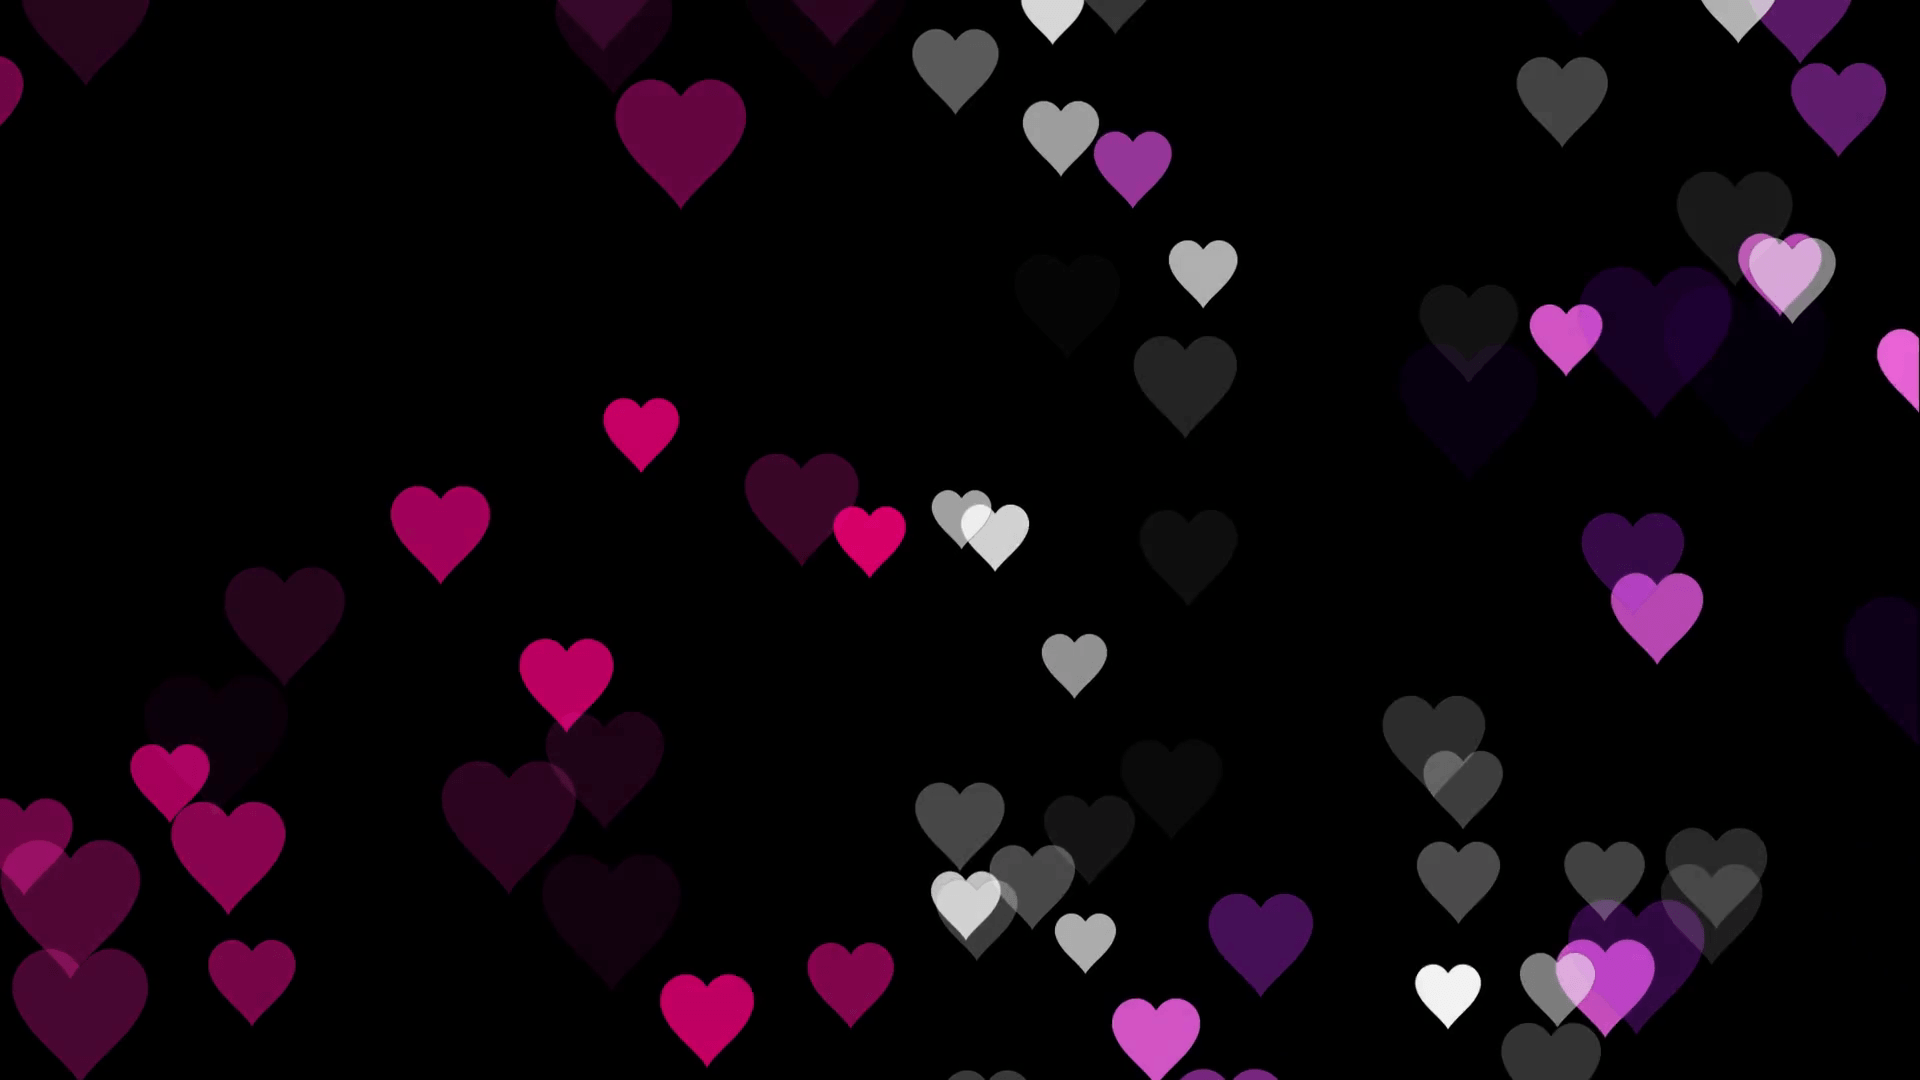 00:00:10 1× Animated many moving small pink purple white hearts